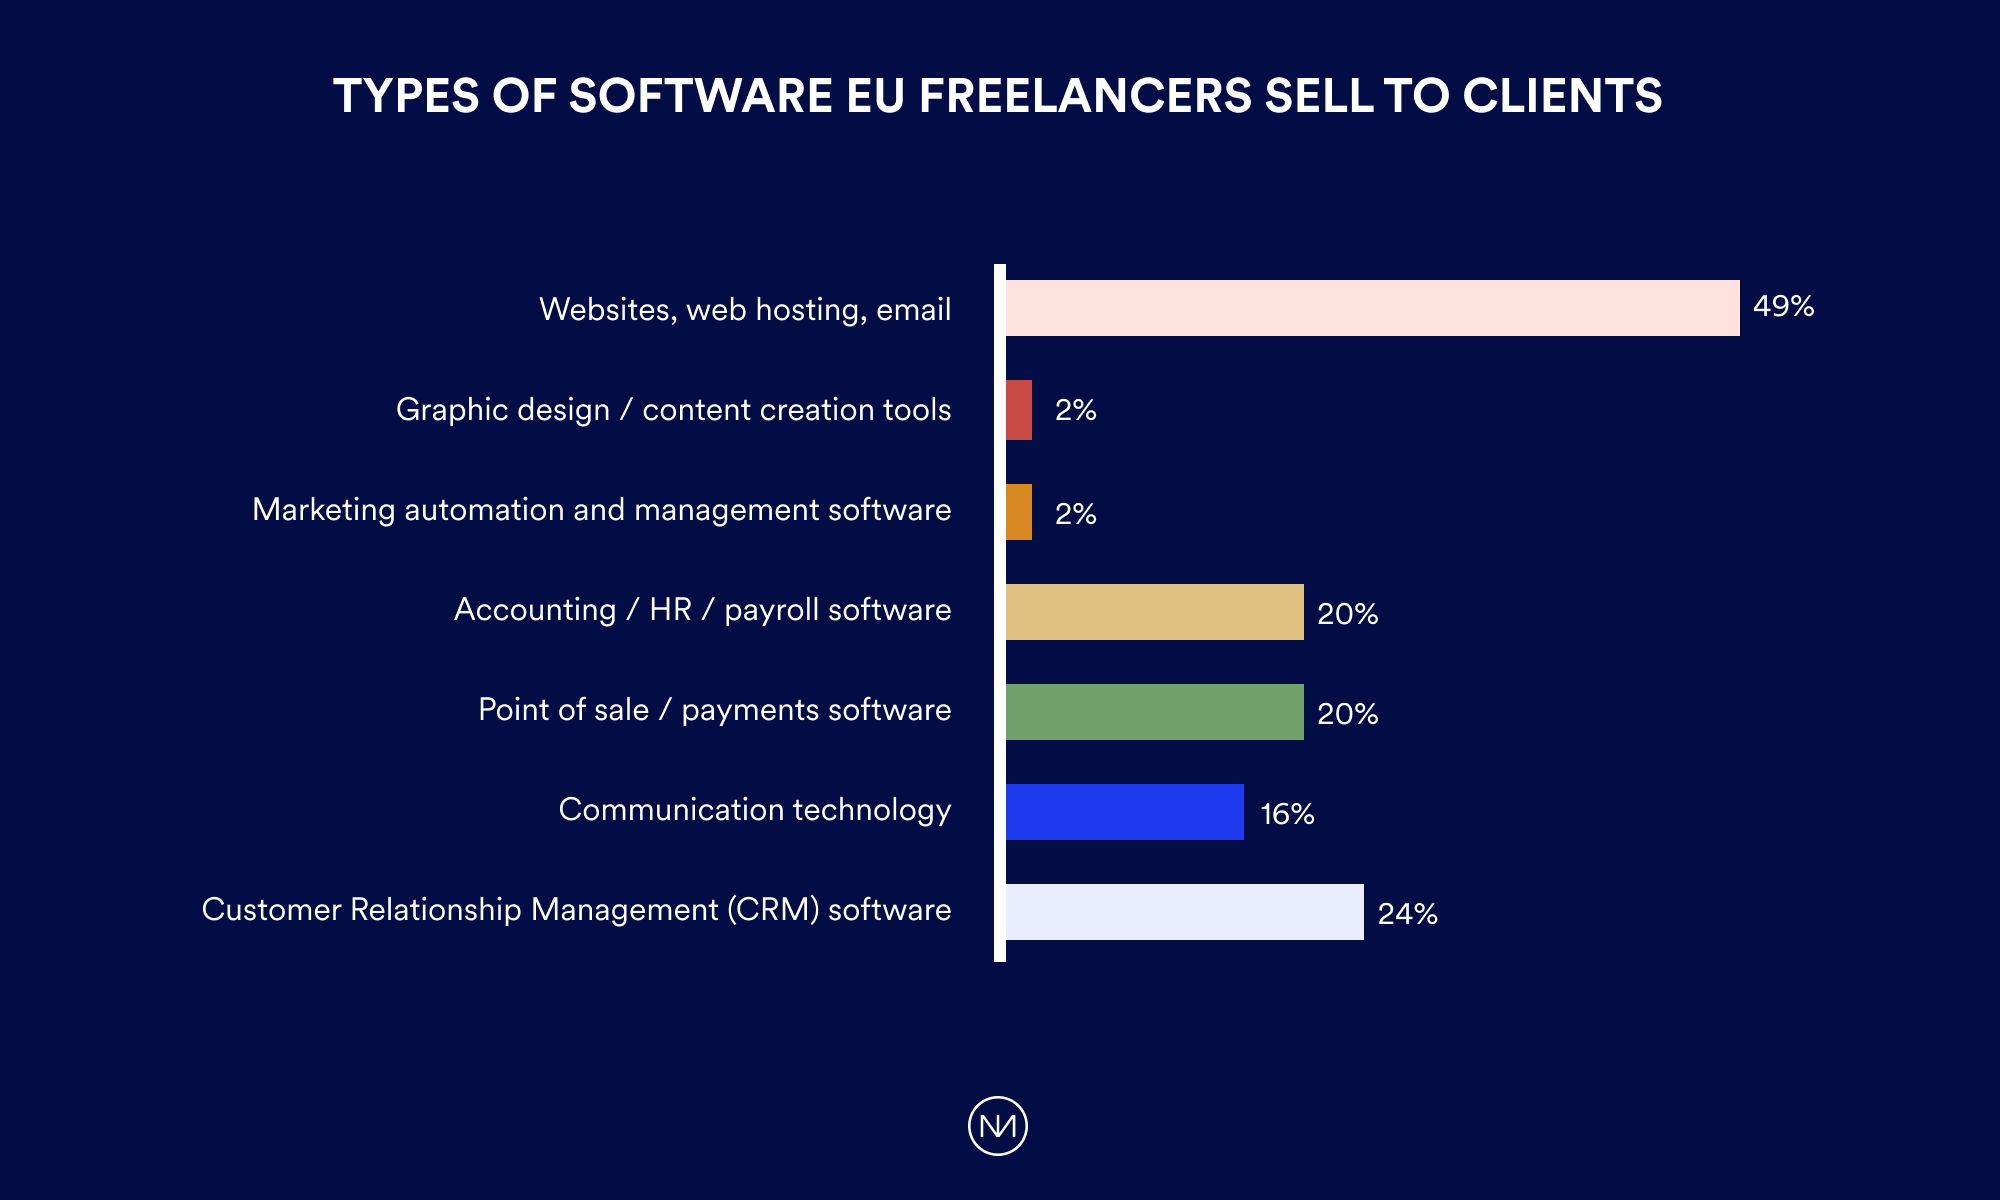 Types of software EU freelancers sell to clients